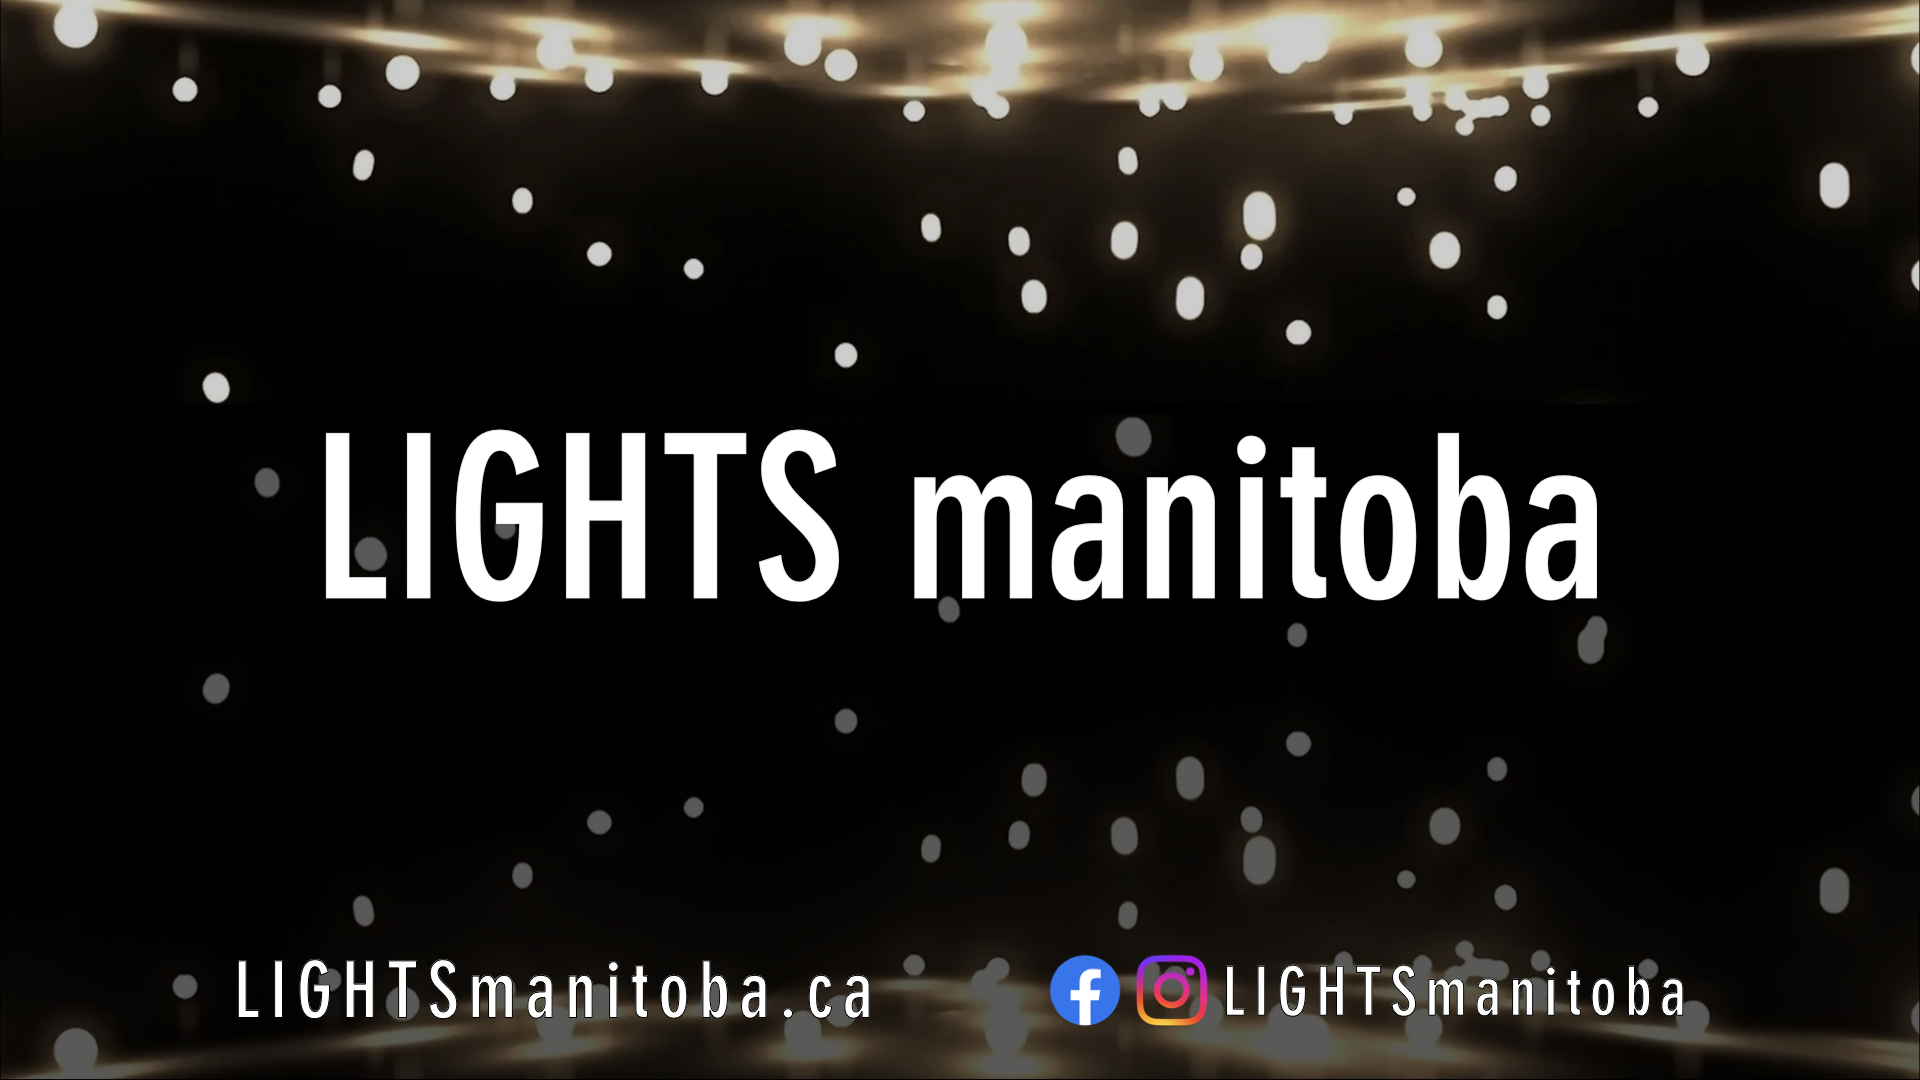 Featured image for “LIGHTS manitoba”